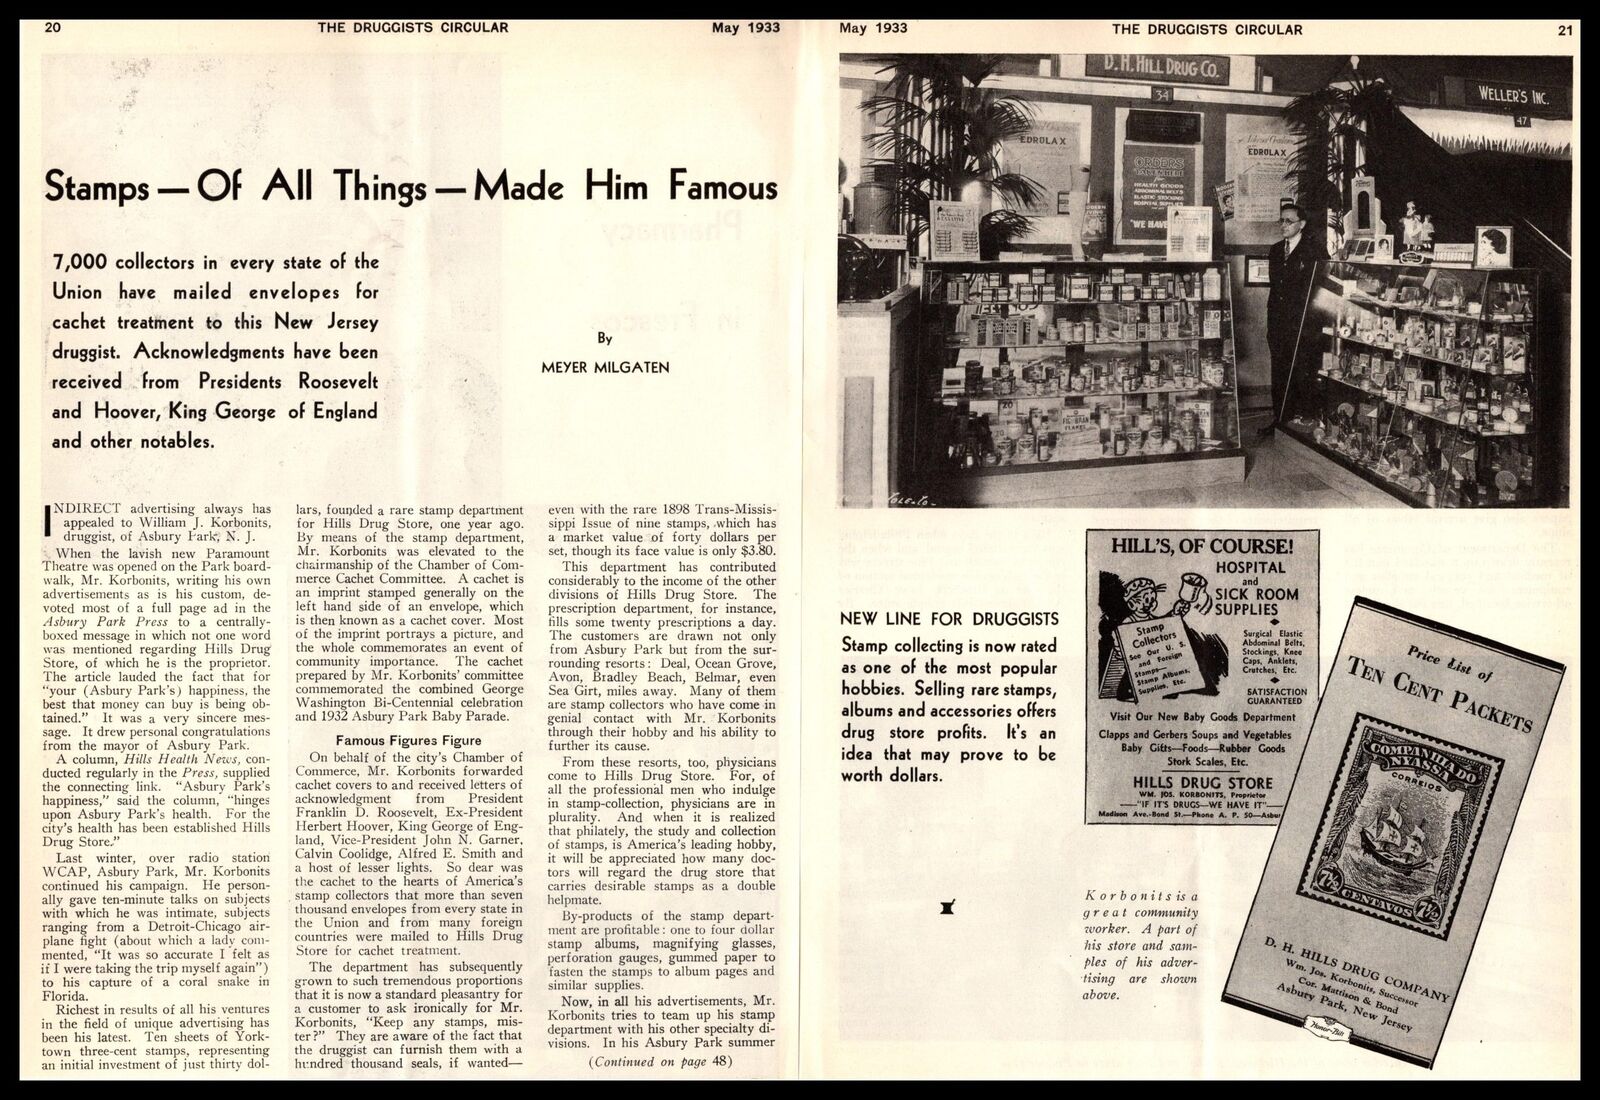 1933 D H Hills Drug Store Asbury Park New Jersey Photos 2-Page Article Print Ad